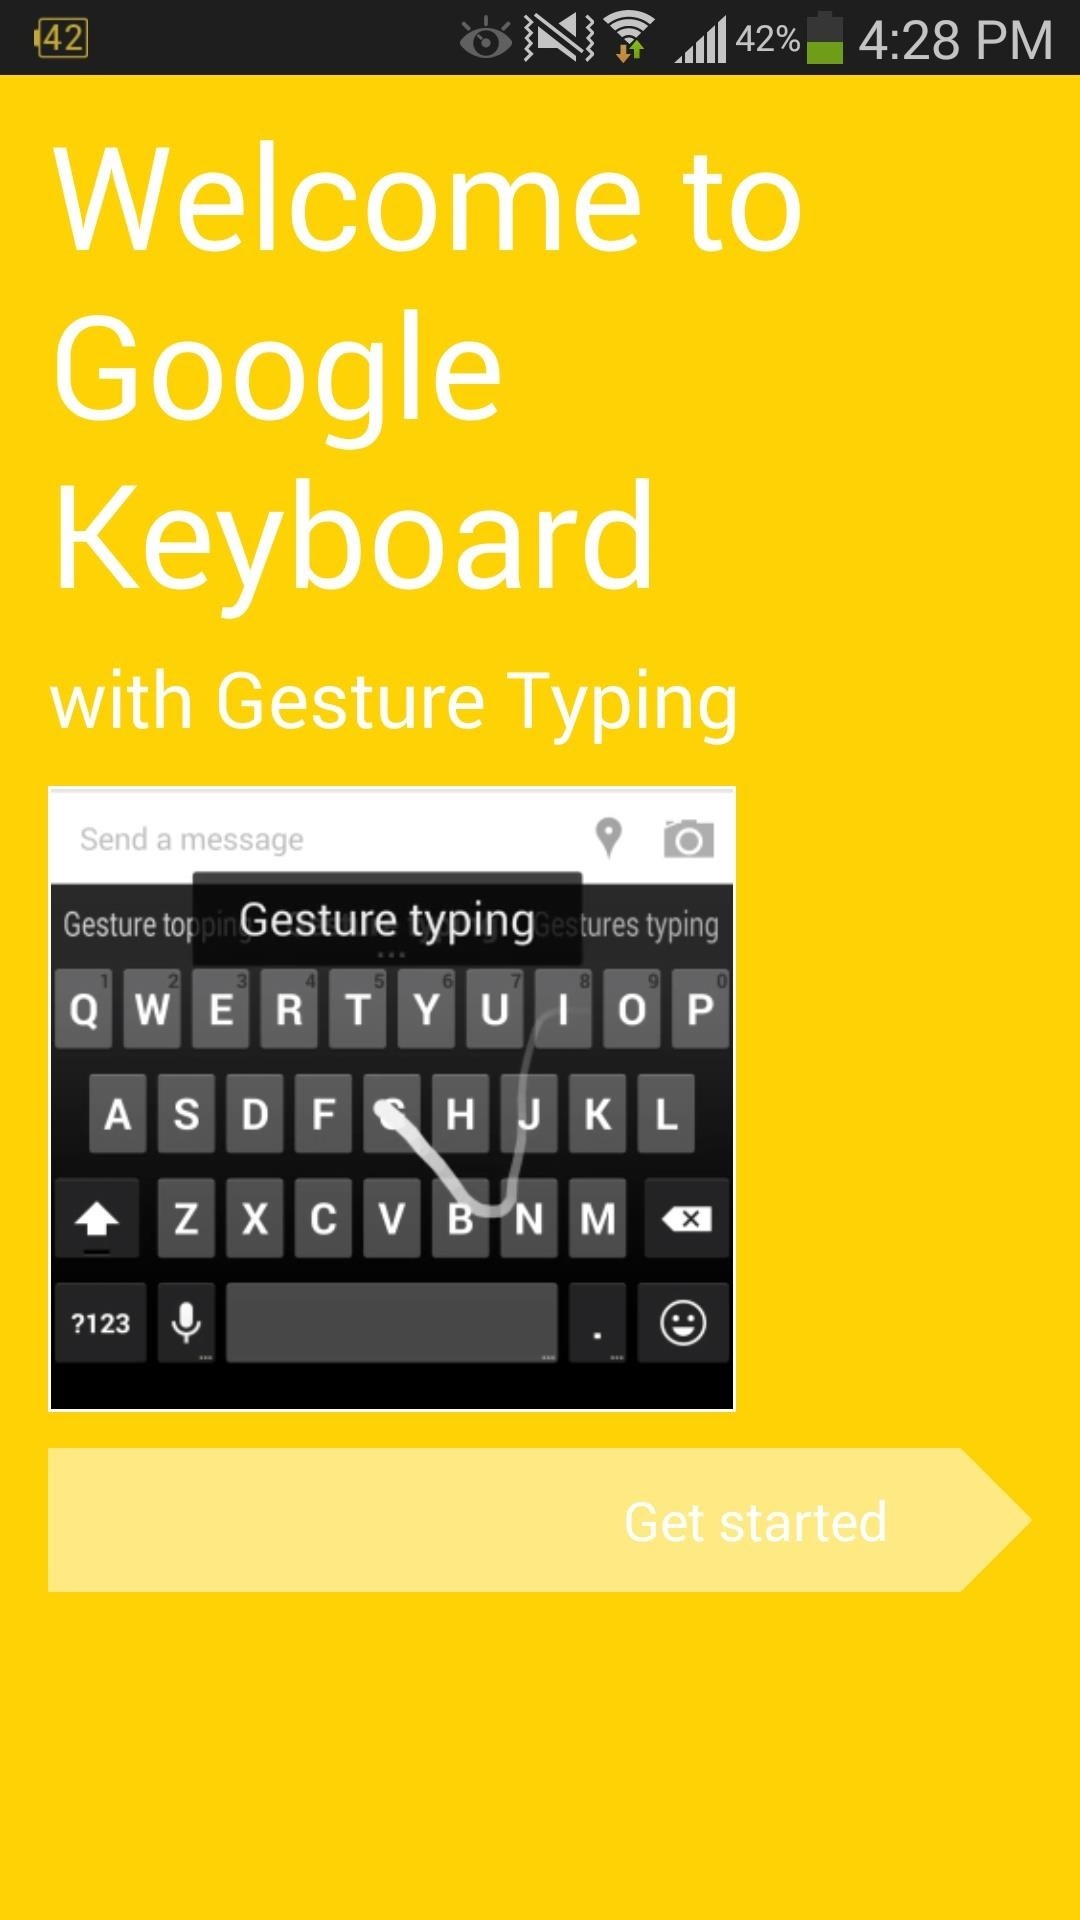 How to Theme the Google Keyboard with New Colors & Shapes on Your Galaxy S4